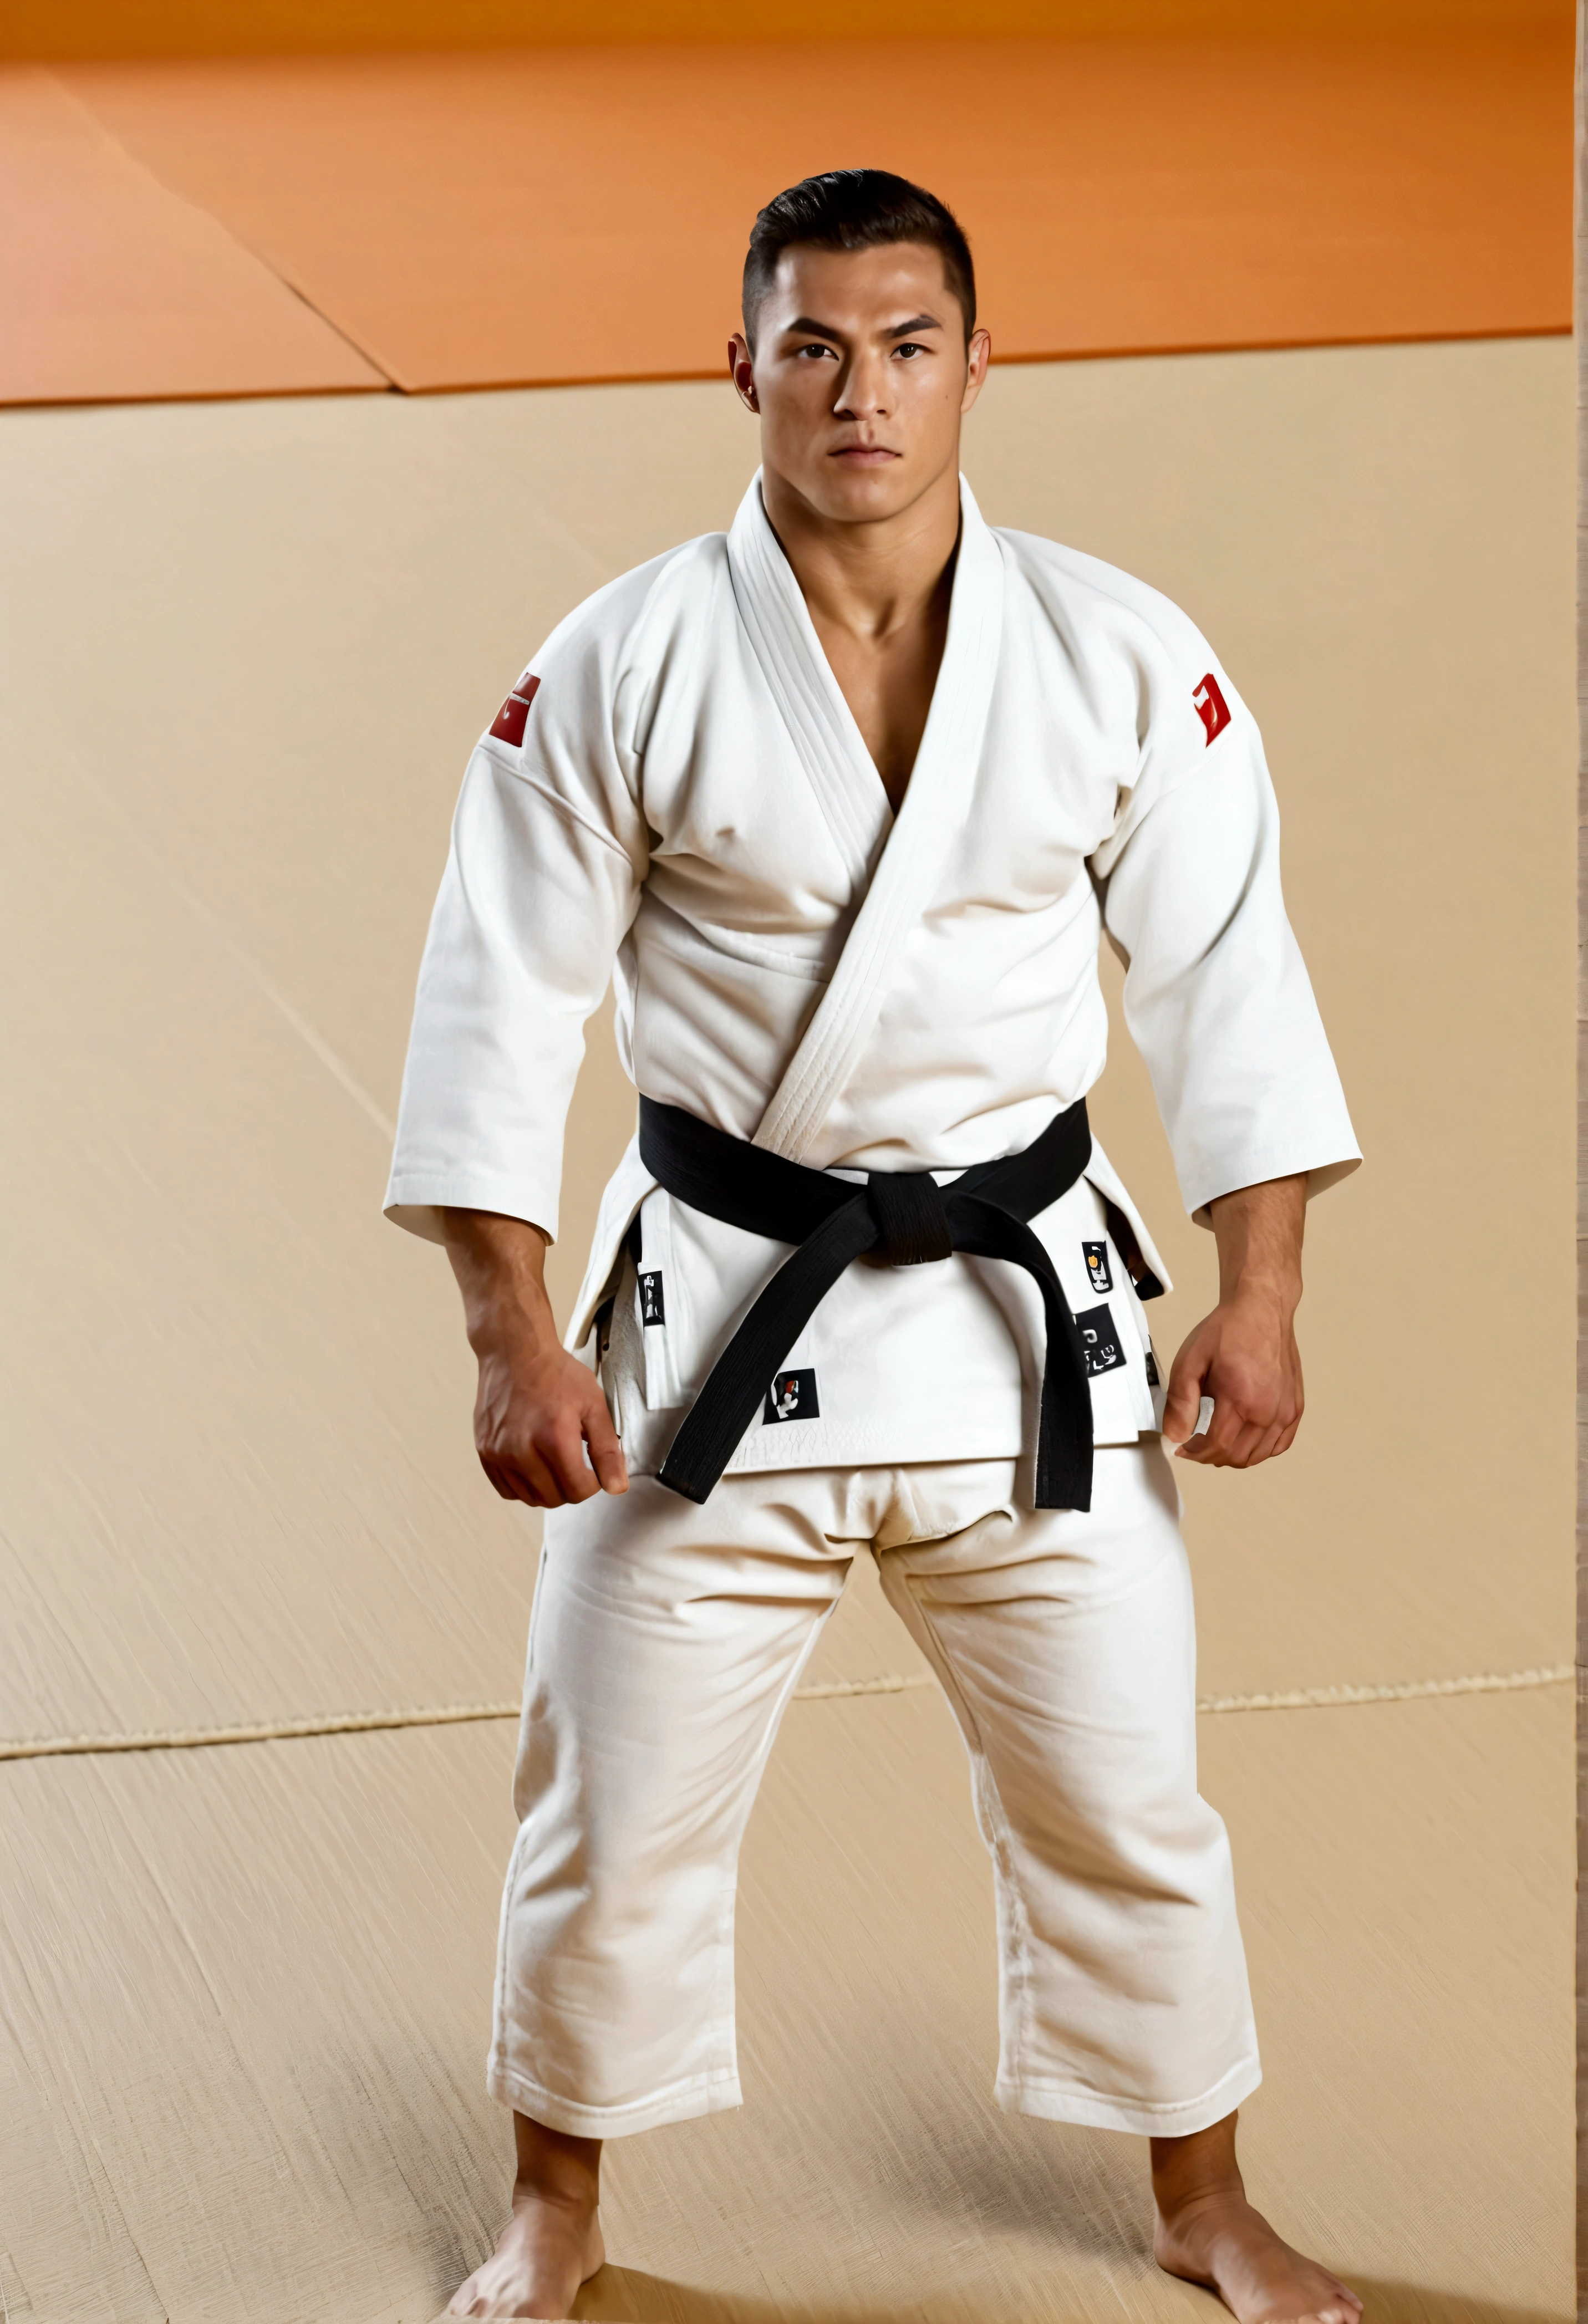 Olympic athletes, judo athletes, full-body, muscular,
Stance,
Judo uniform, black belt,
Centre stage of Olympic venue with tatami mats laid out, height of excitement